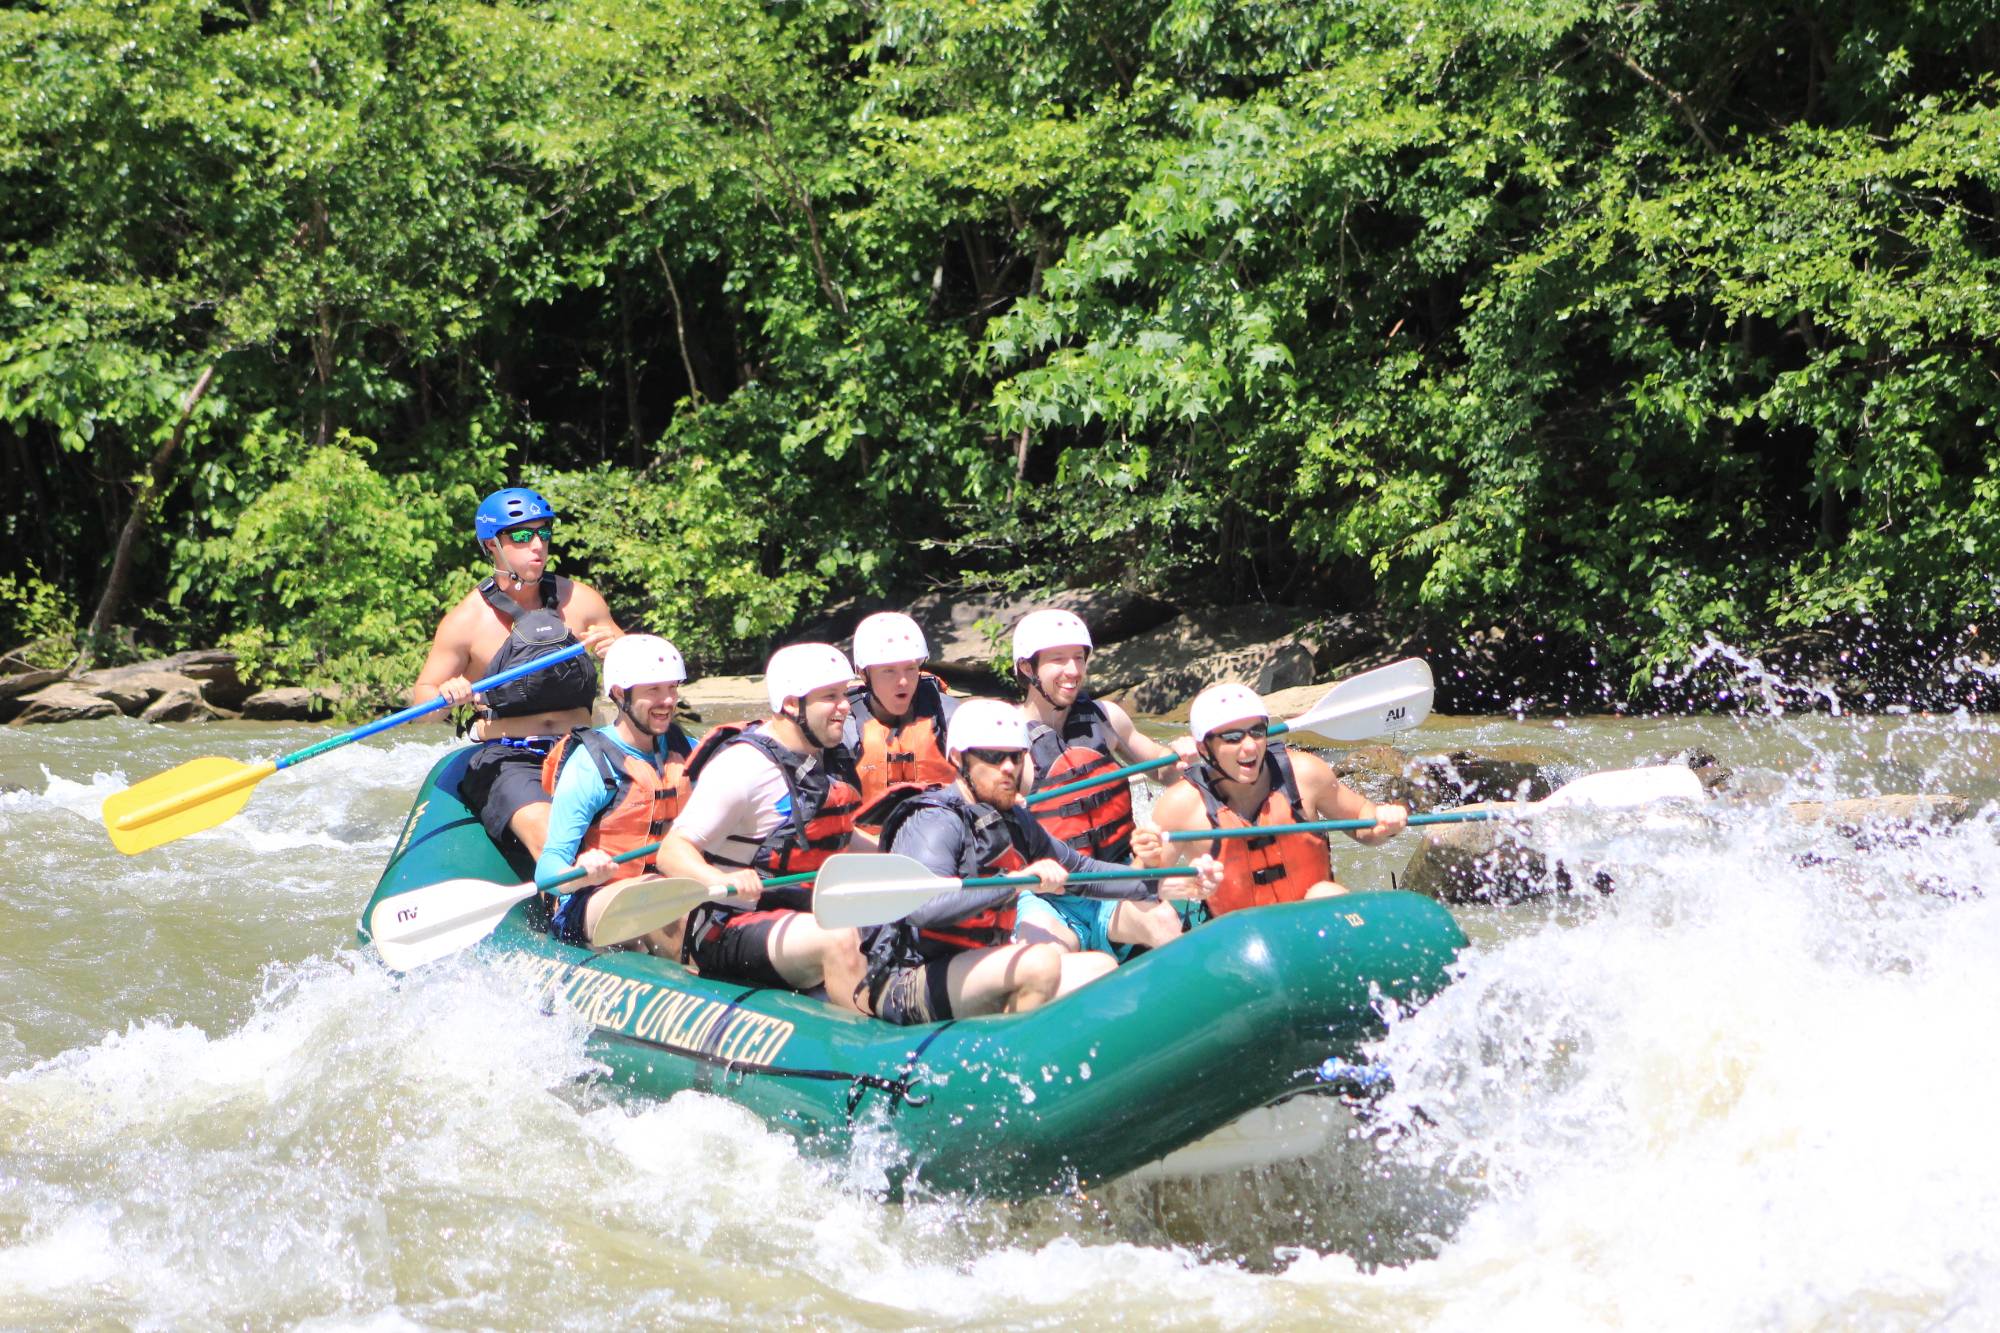 Group rafting on river in 2021